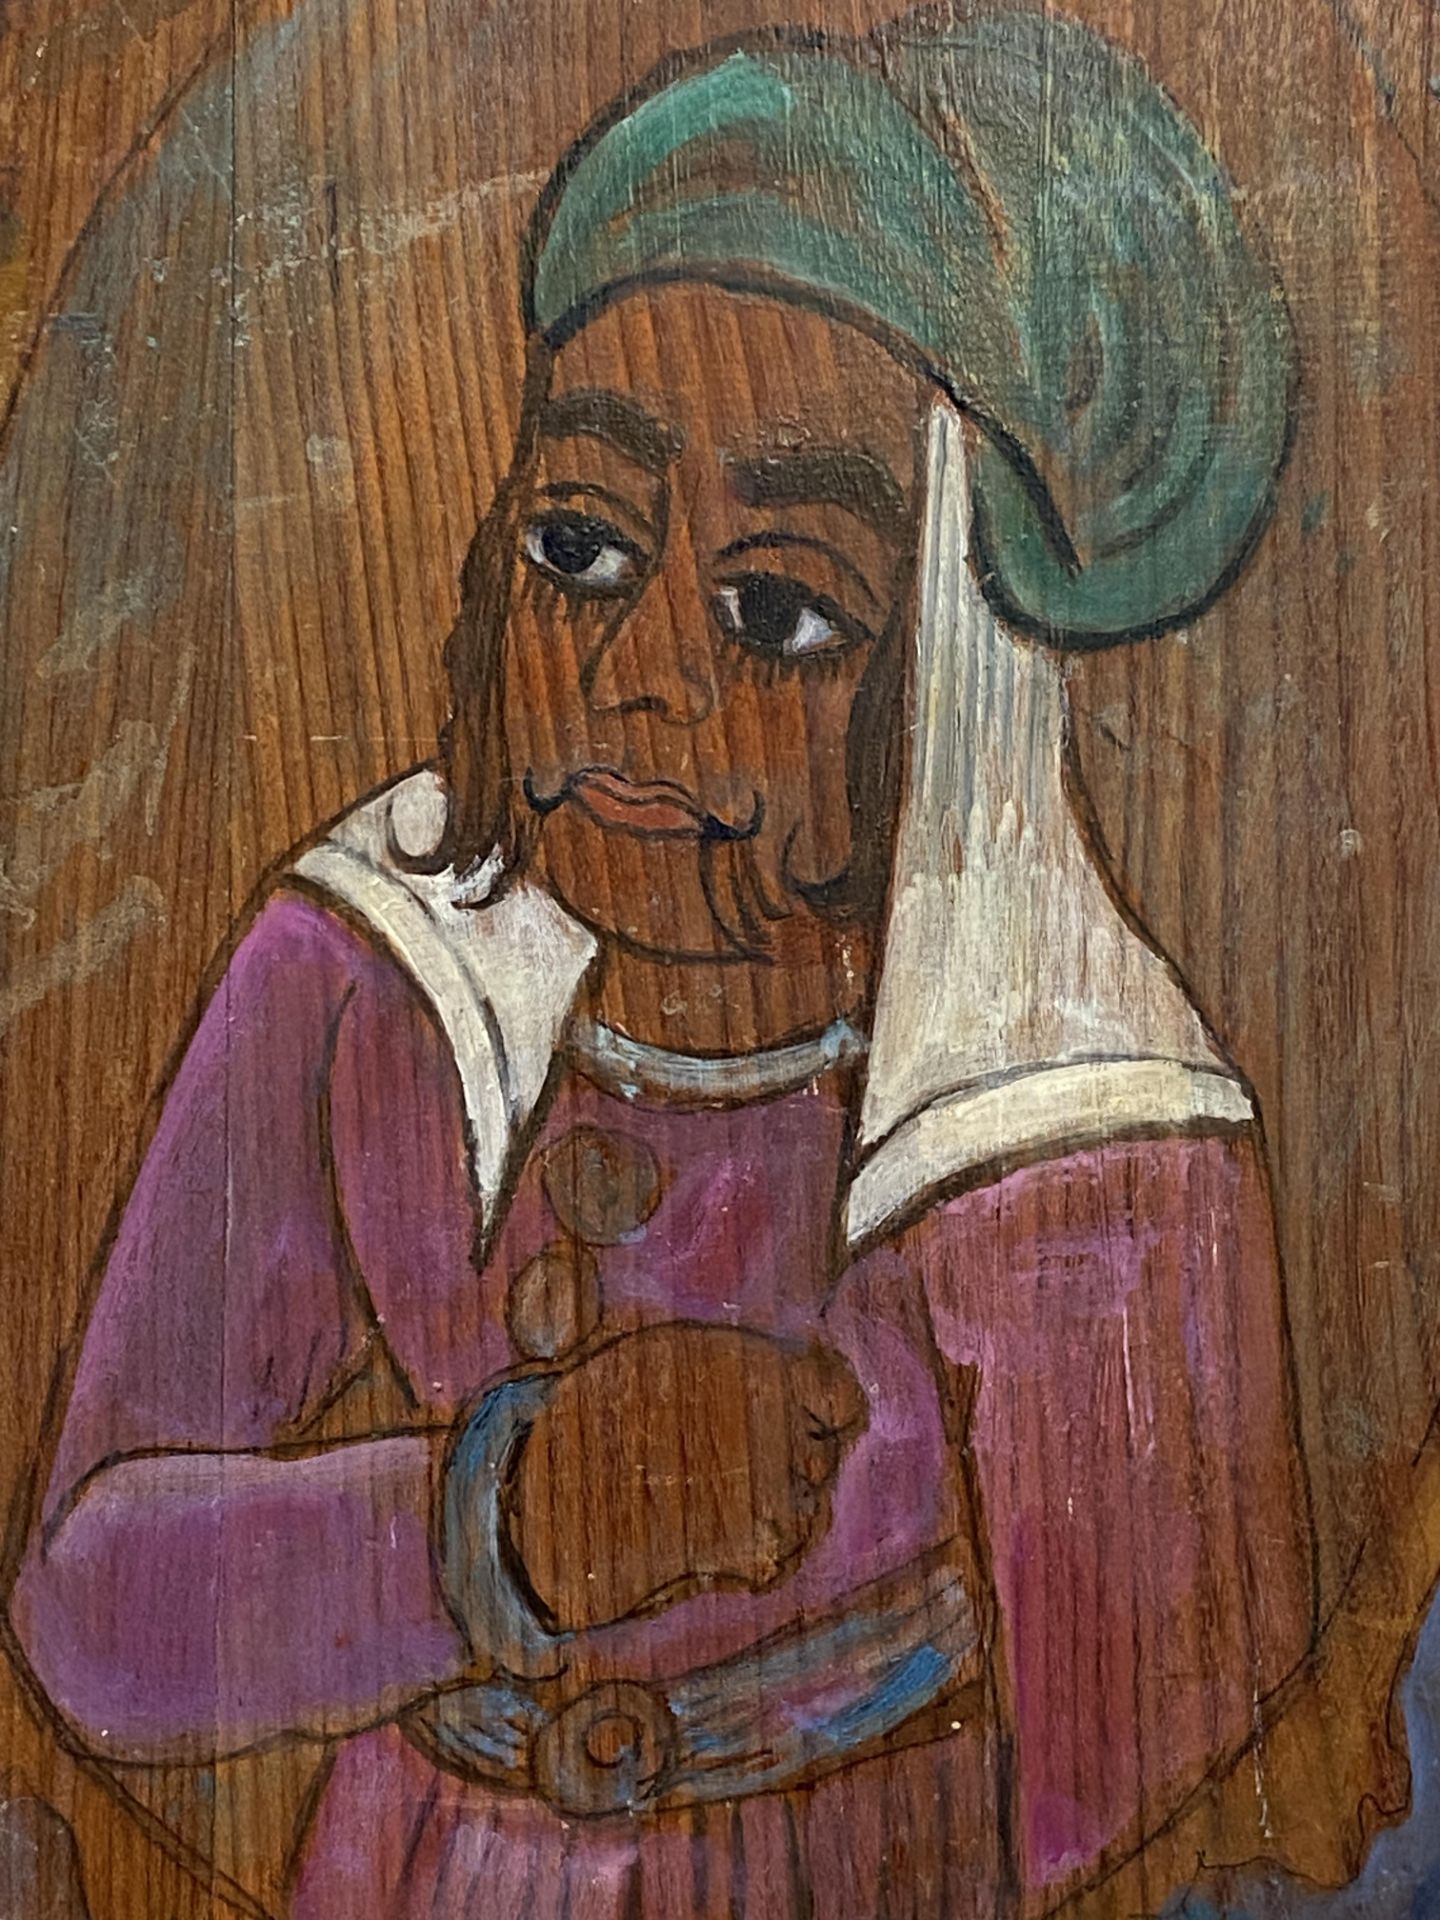 Painting on wood "Persian Prince", by Alex Porter - Image 3 of 4